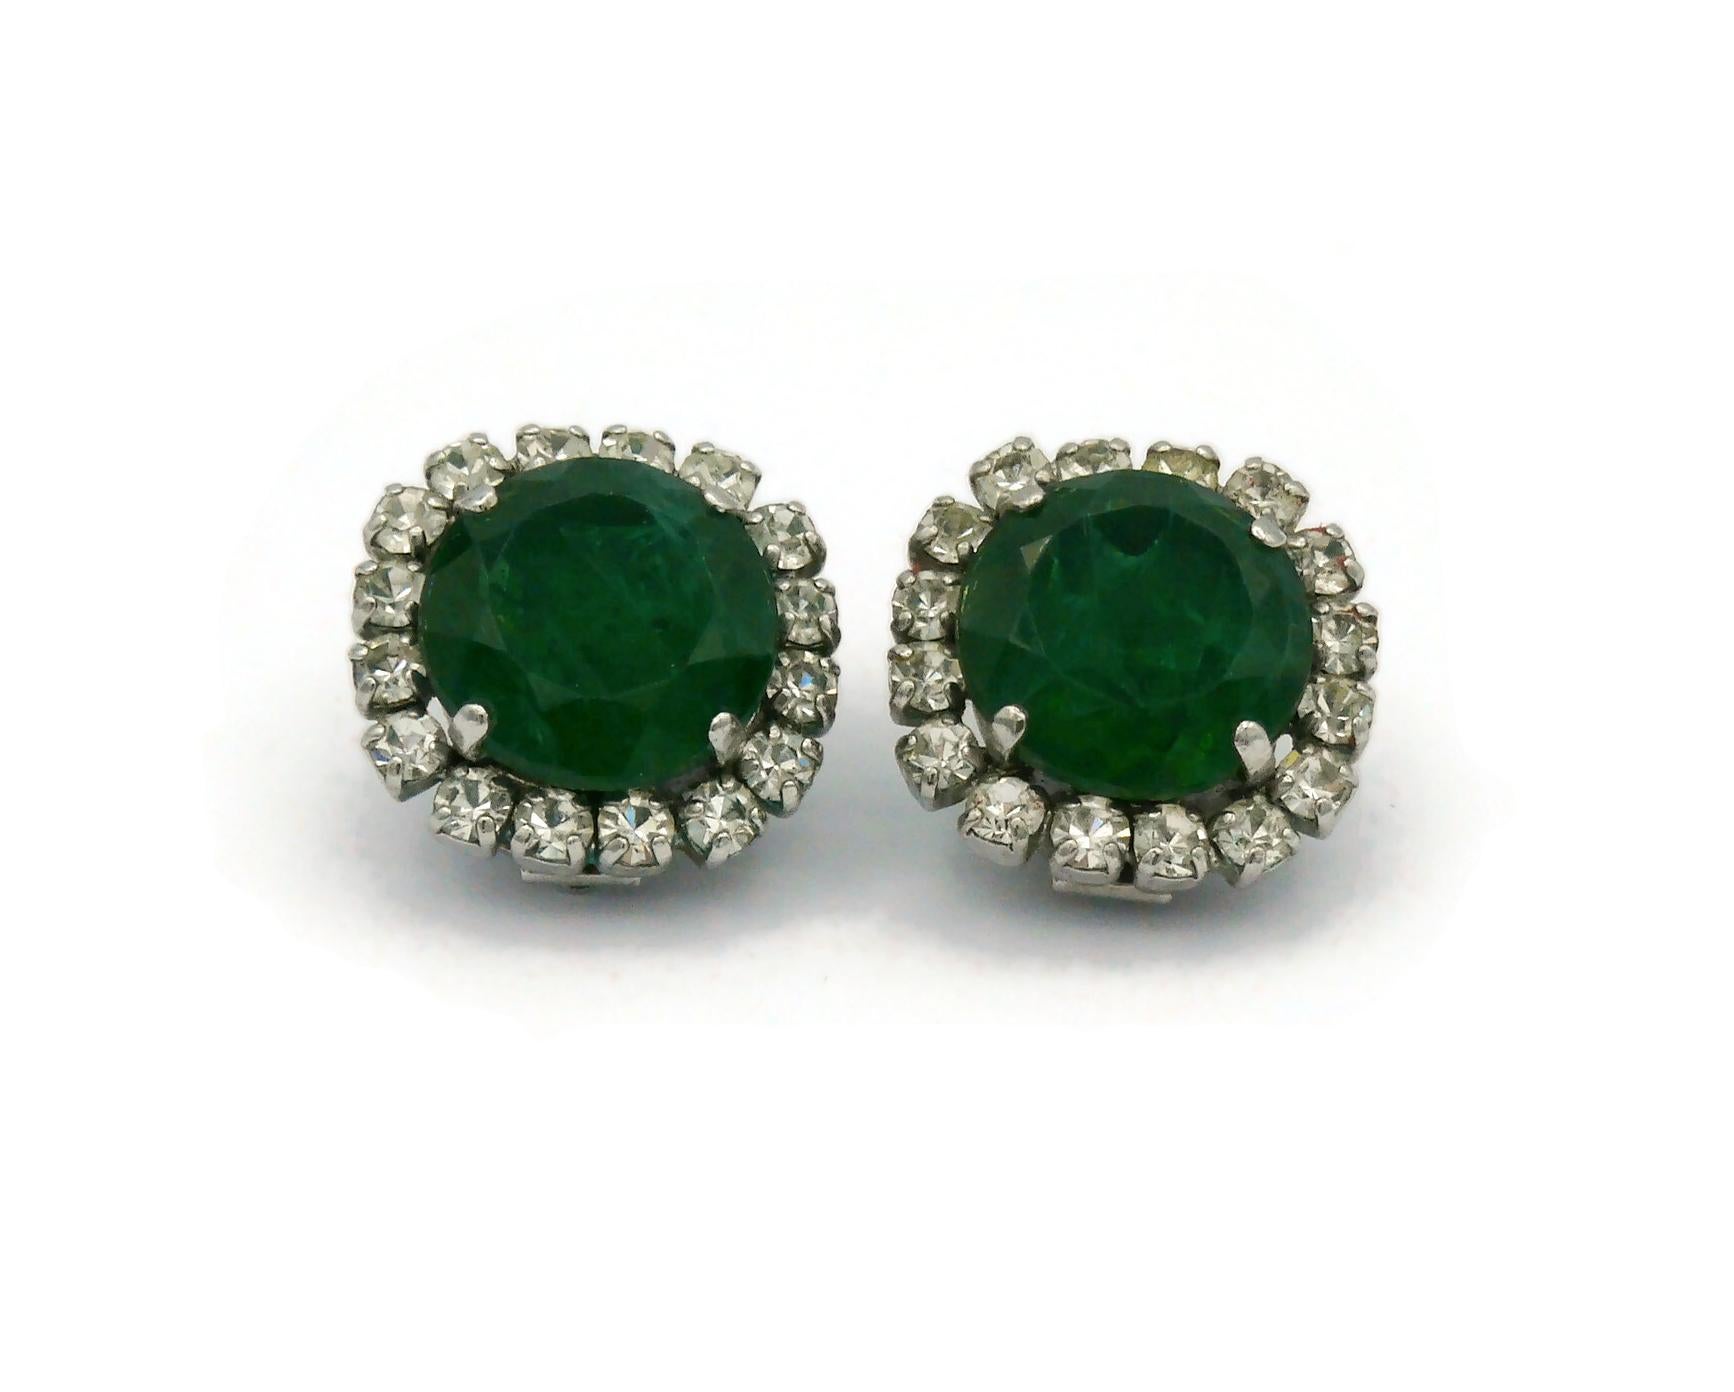 CHRISTIAN DIOR Vintage Jewelled Clip-On Earrings, 1970 For Sale 3